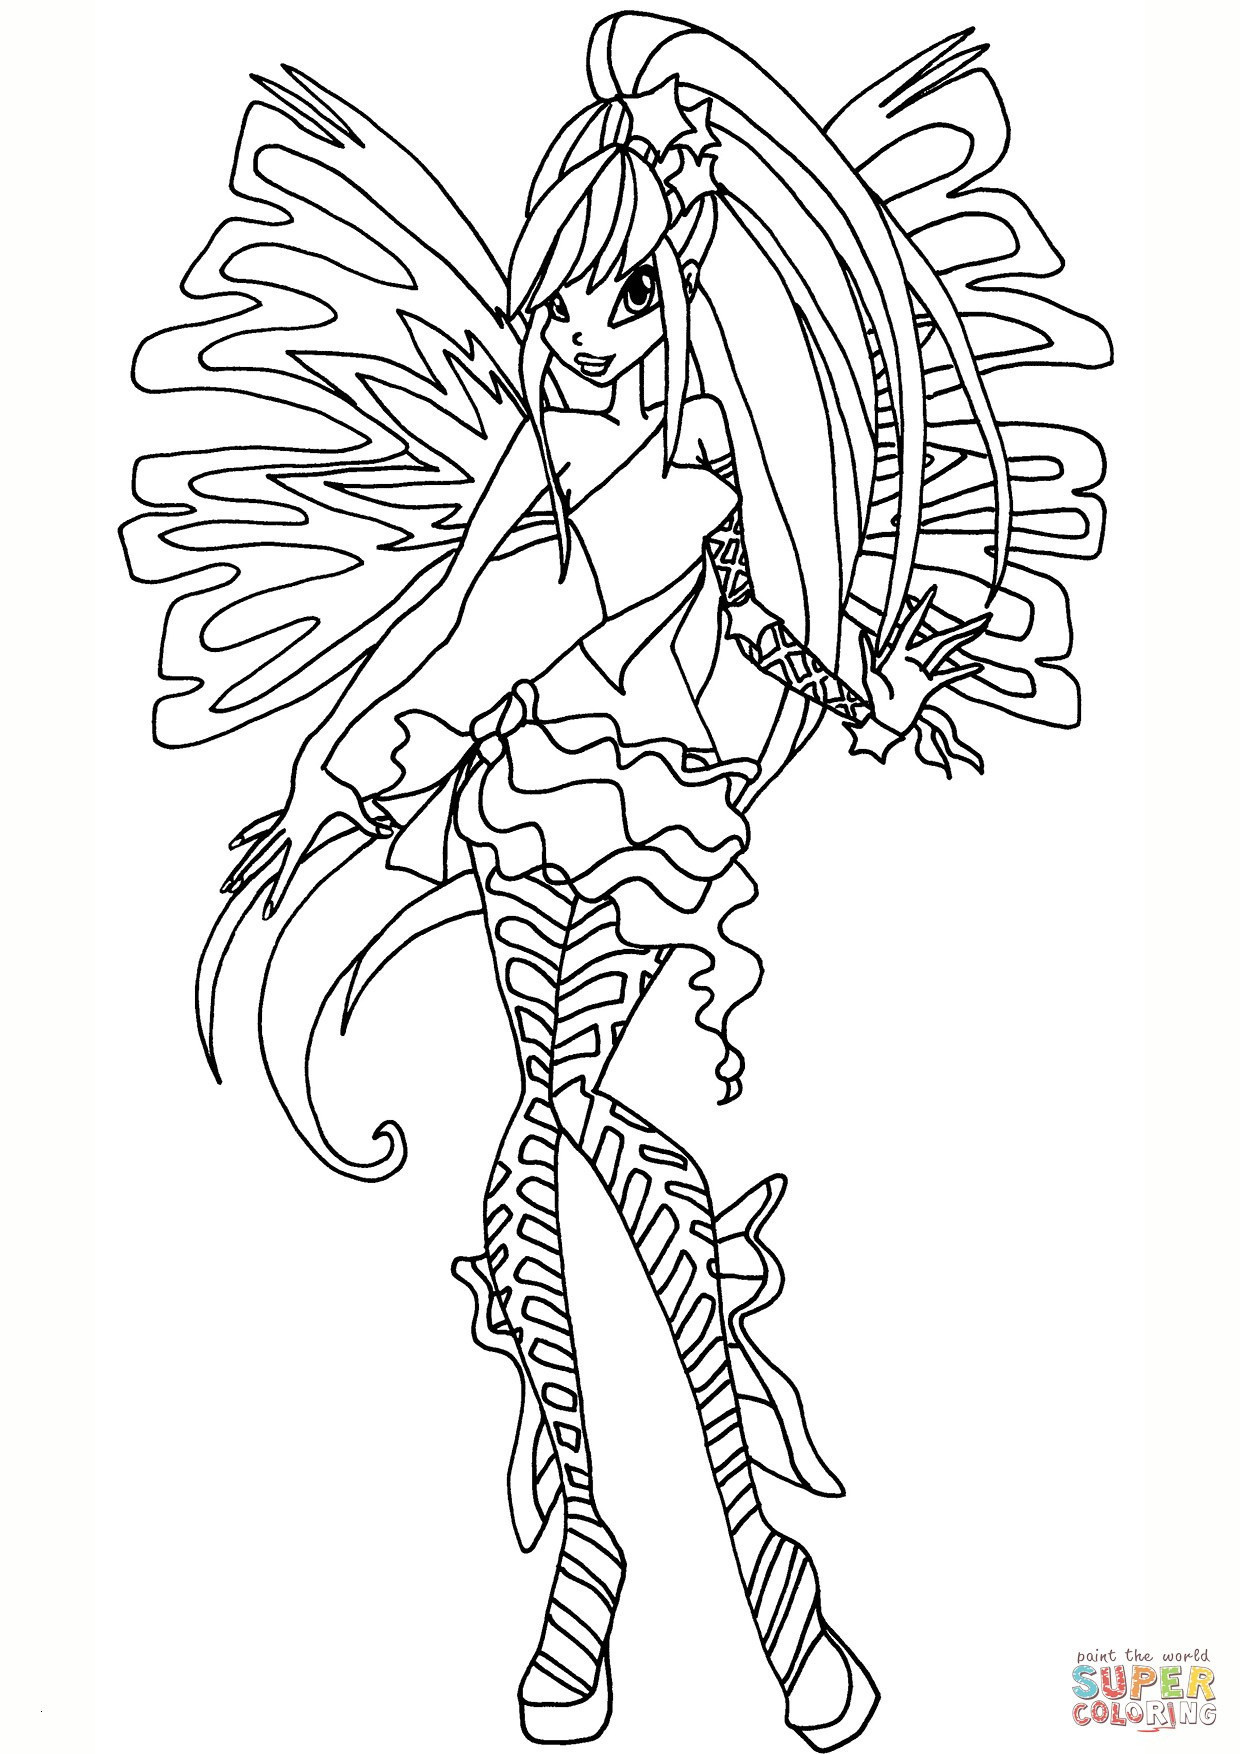 Ausmalbilder Winx
 Awesome Winx Club Coloring Pages – spurl